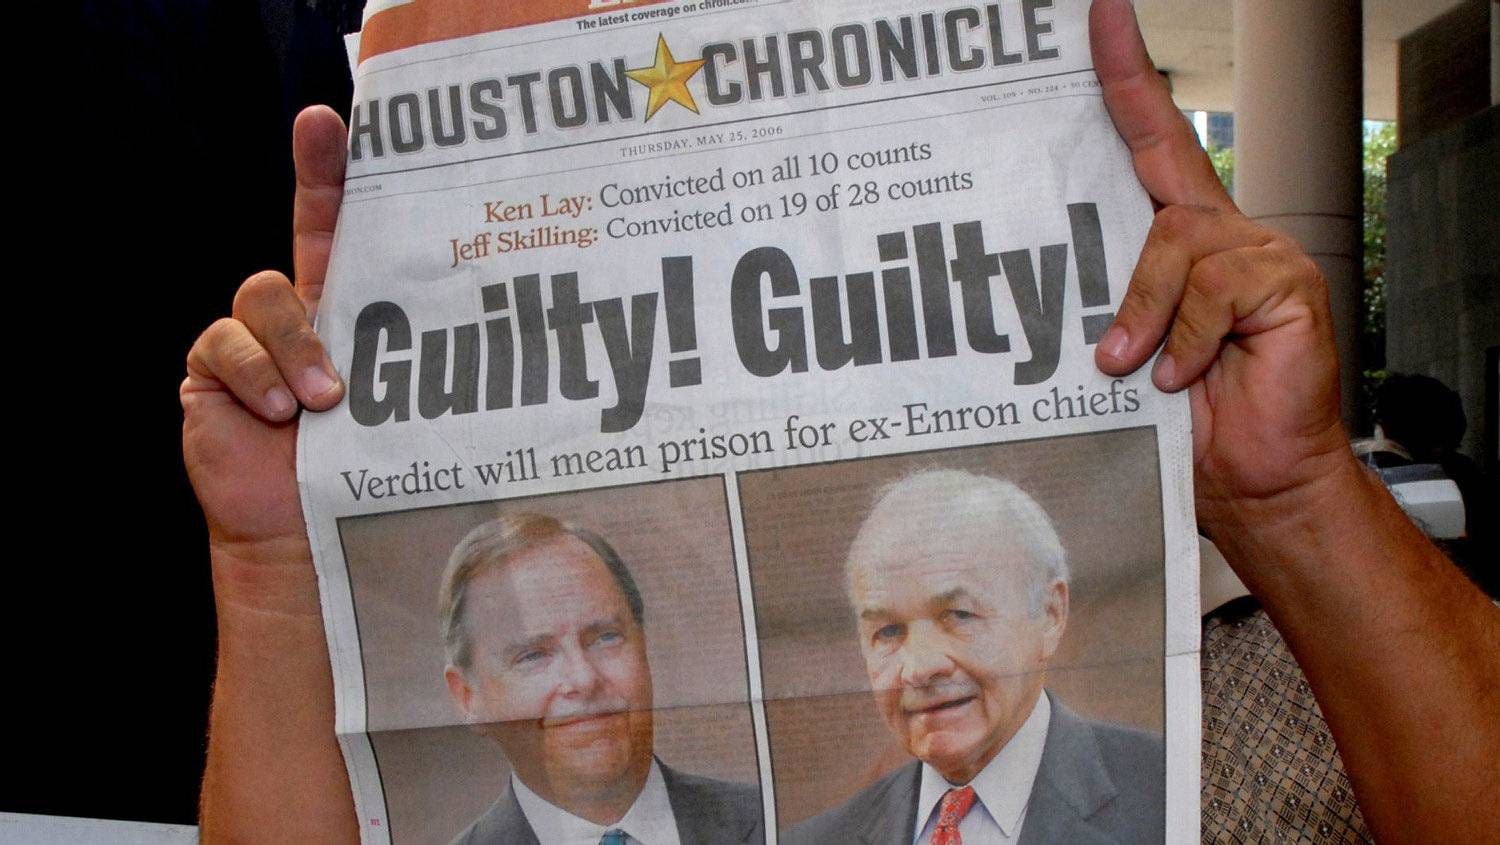 Image result for former enron execs kenneth lay and jeffrey skilling are convicted of conspiracy and fraud